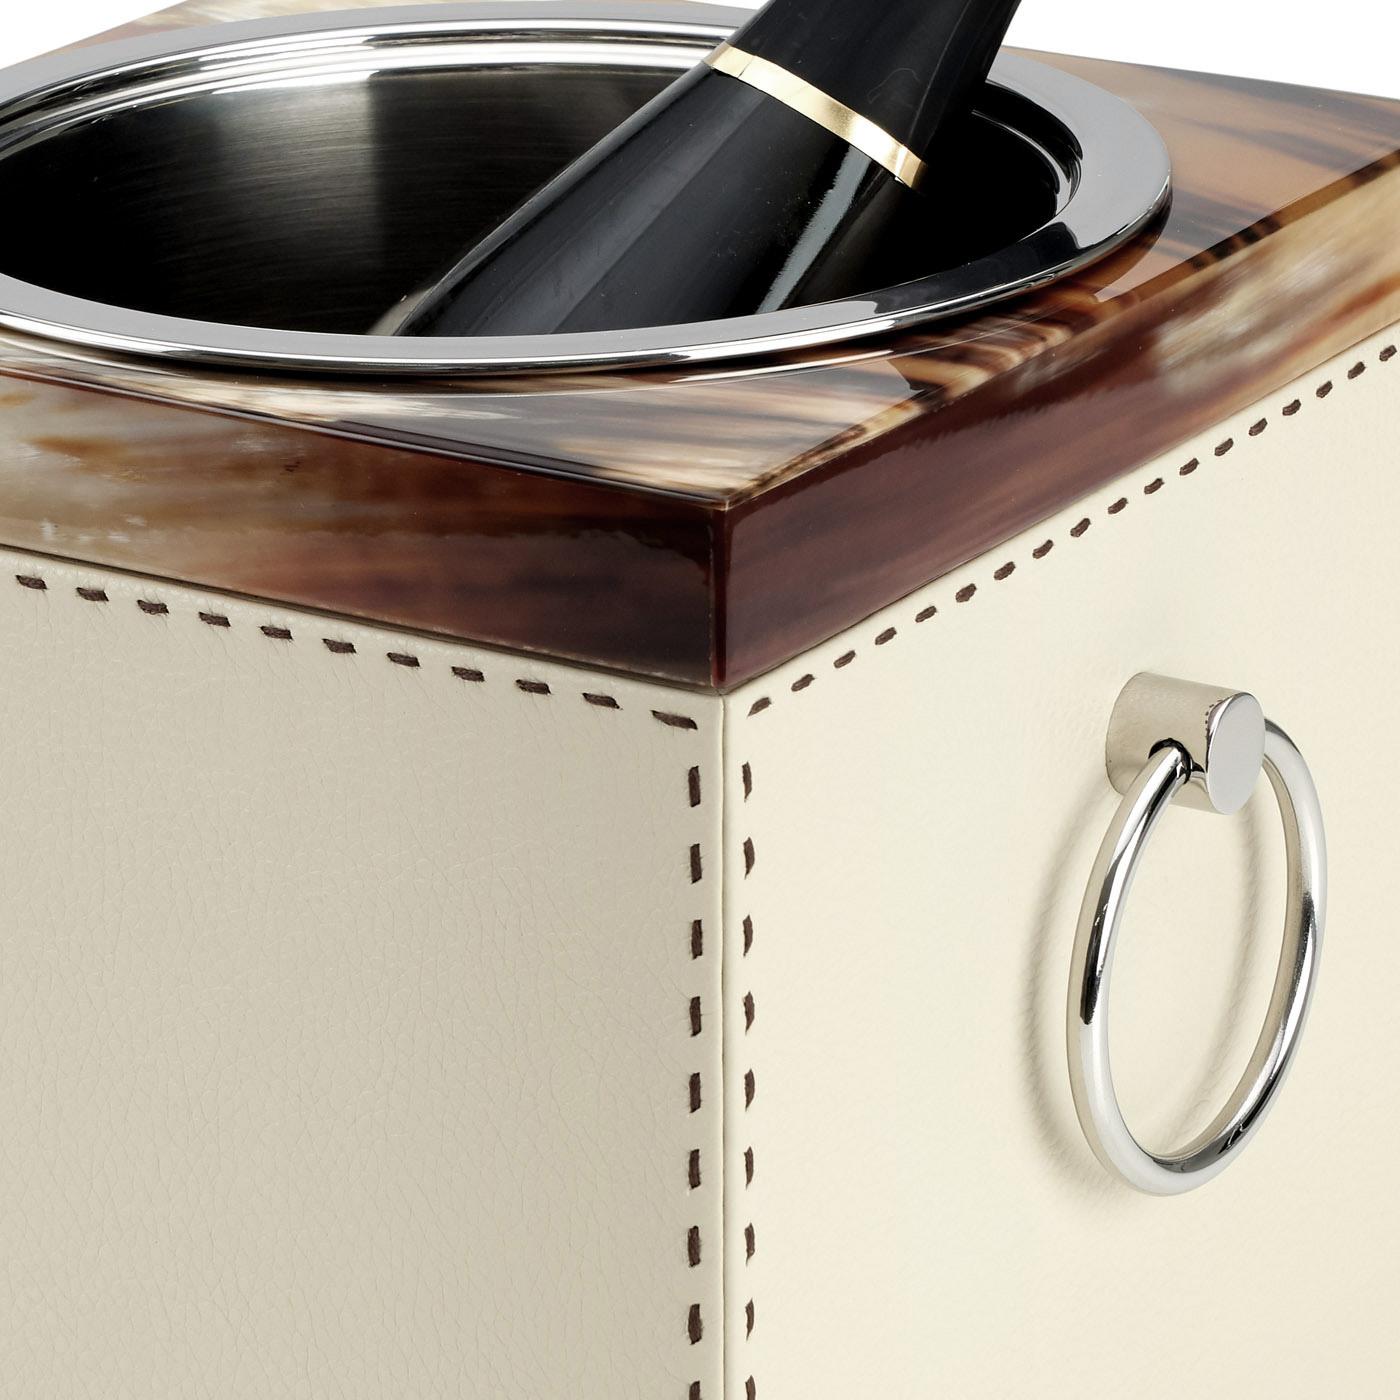 Contemporary Nives Champagne Bucket in Pebbled Leather and Corno Italiano, Mod. 4455 For Sale